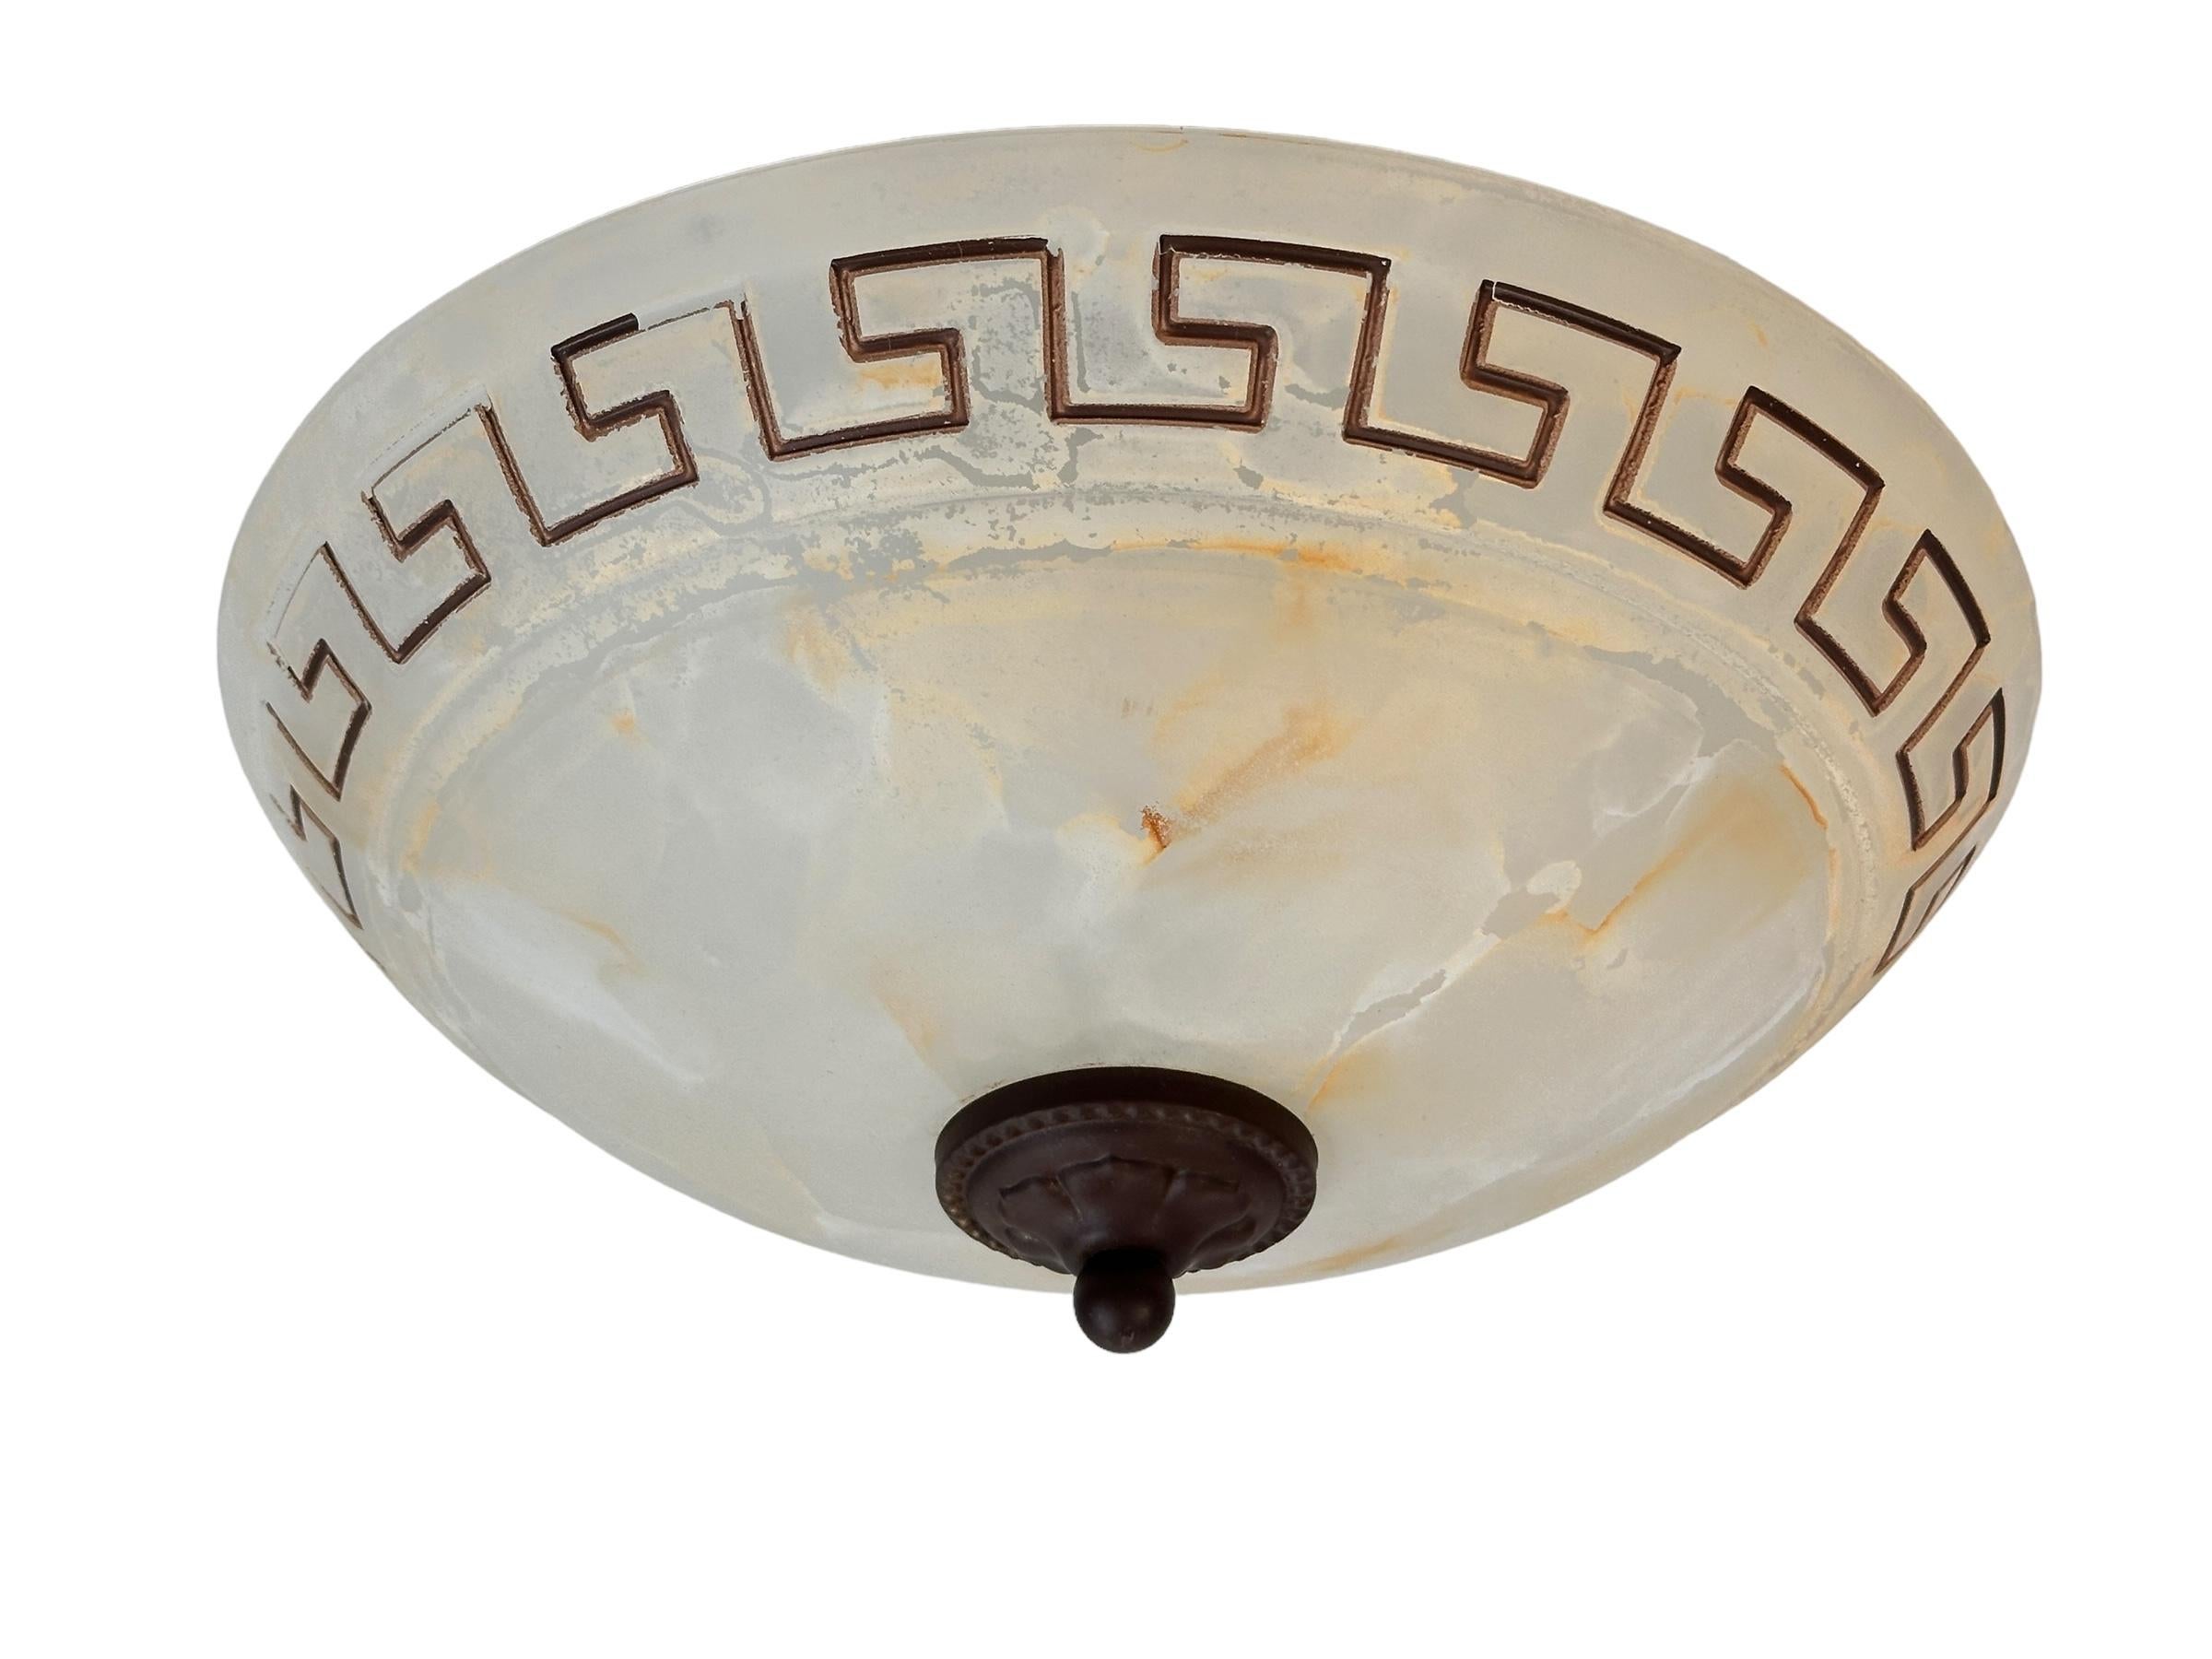 A beautiful Murano glass flush mount. Made by Brilliant Leuchten, Germany in Italy in the 1980s. Gorgeous textured glass flush mount with metal fixture. The Fixture requires one European E27 / 110 Volt Edison bulb, up to 60 watts. It is very